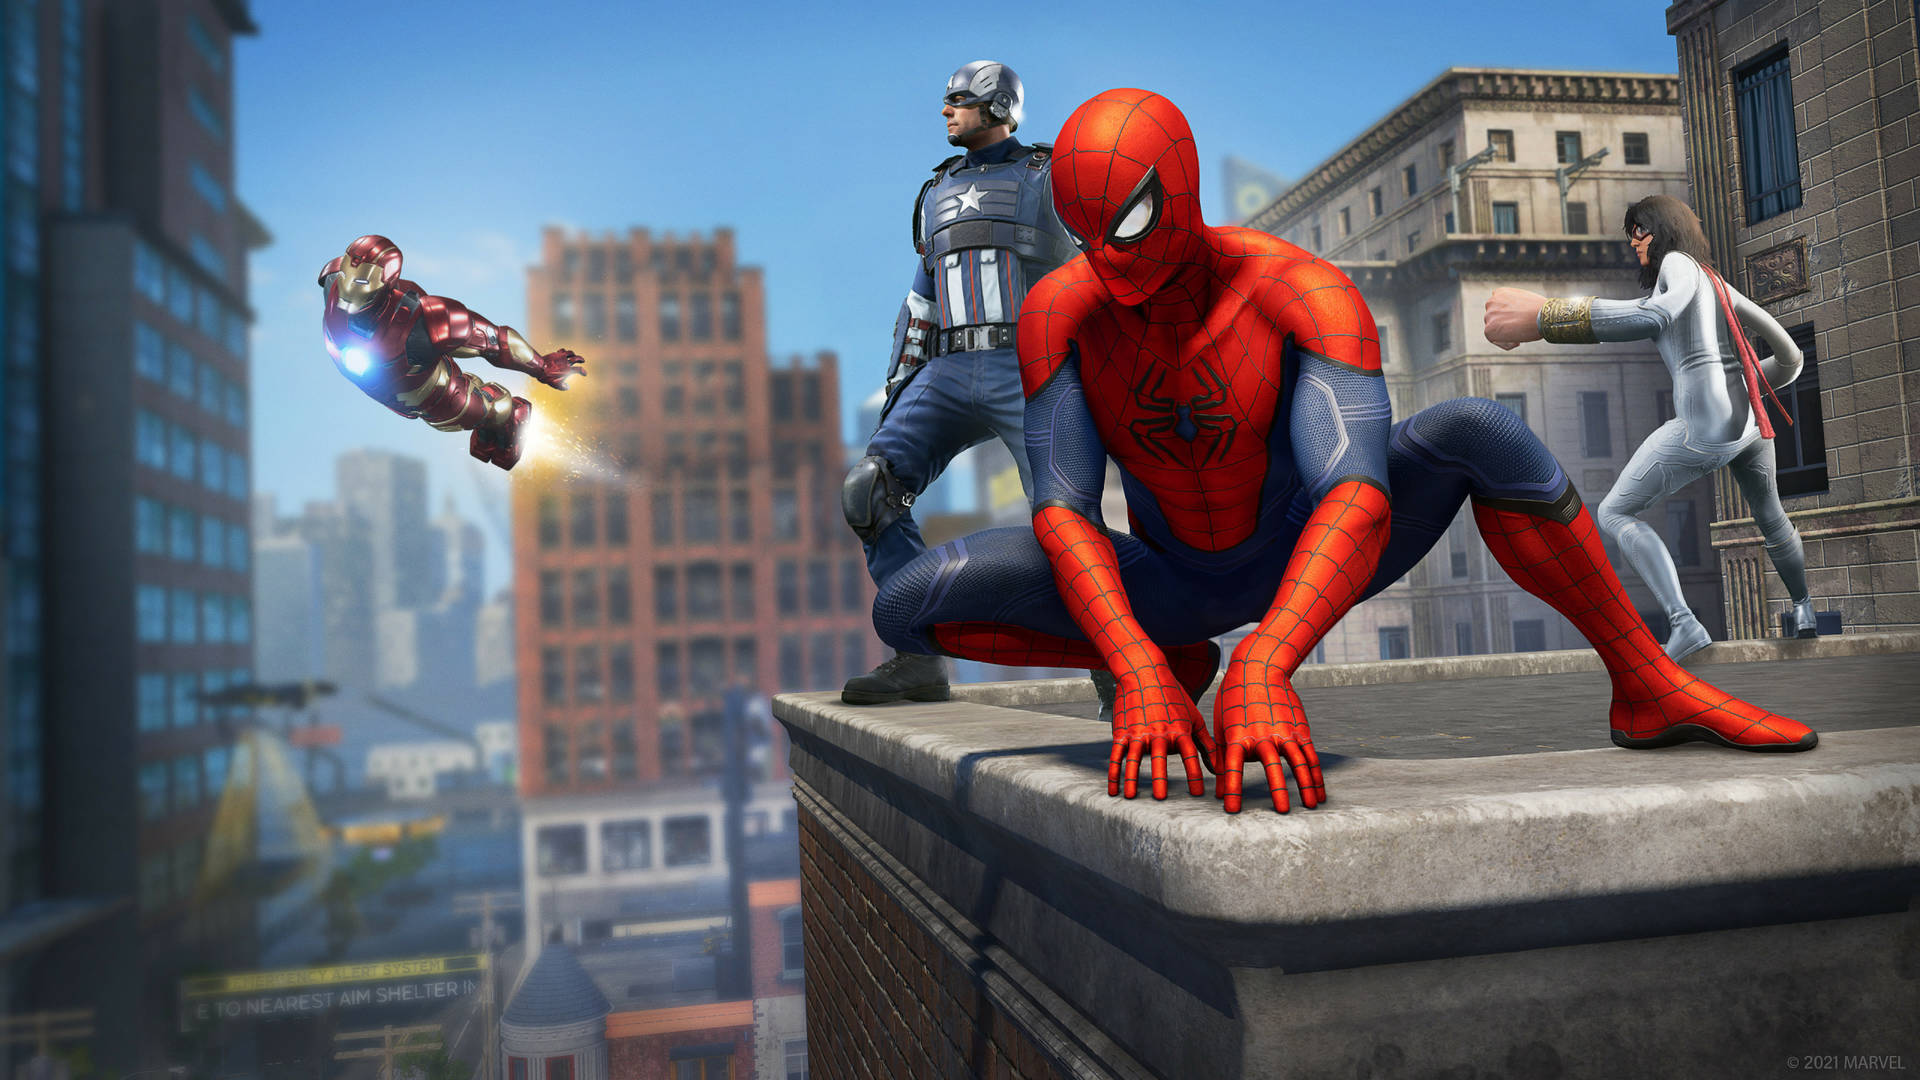 Get ready to enter a world of superheroes with the new Marvel Xbox! Wallpaper